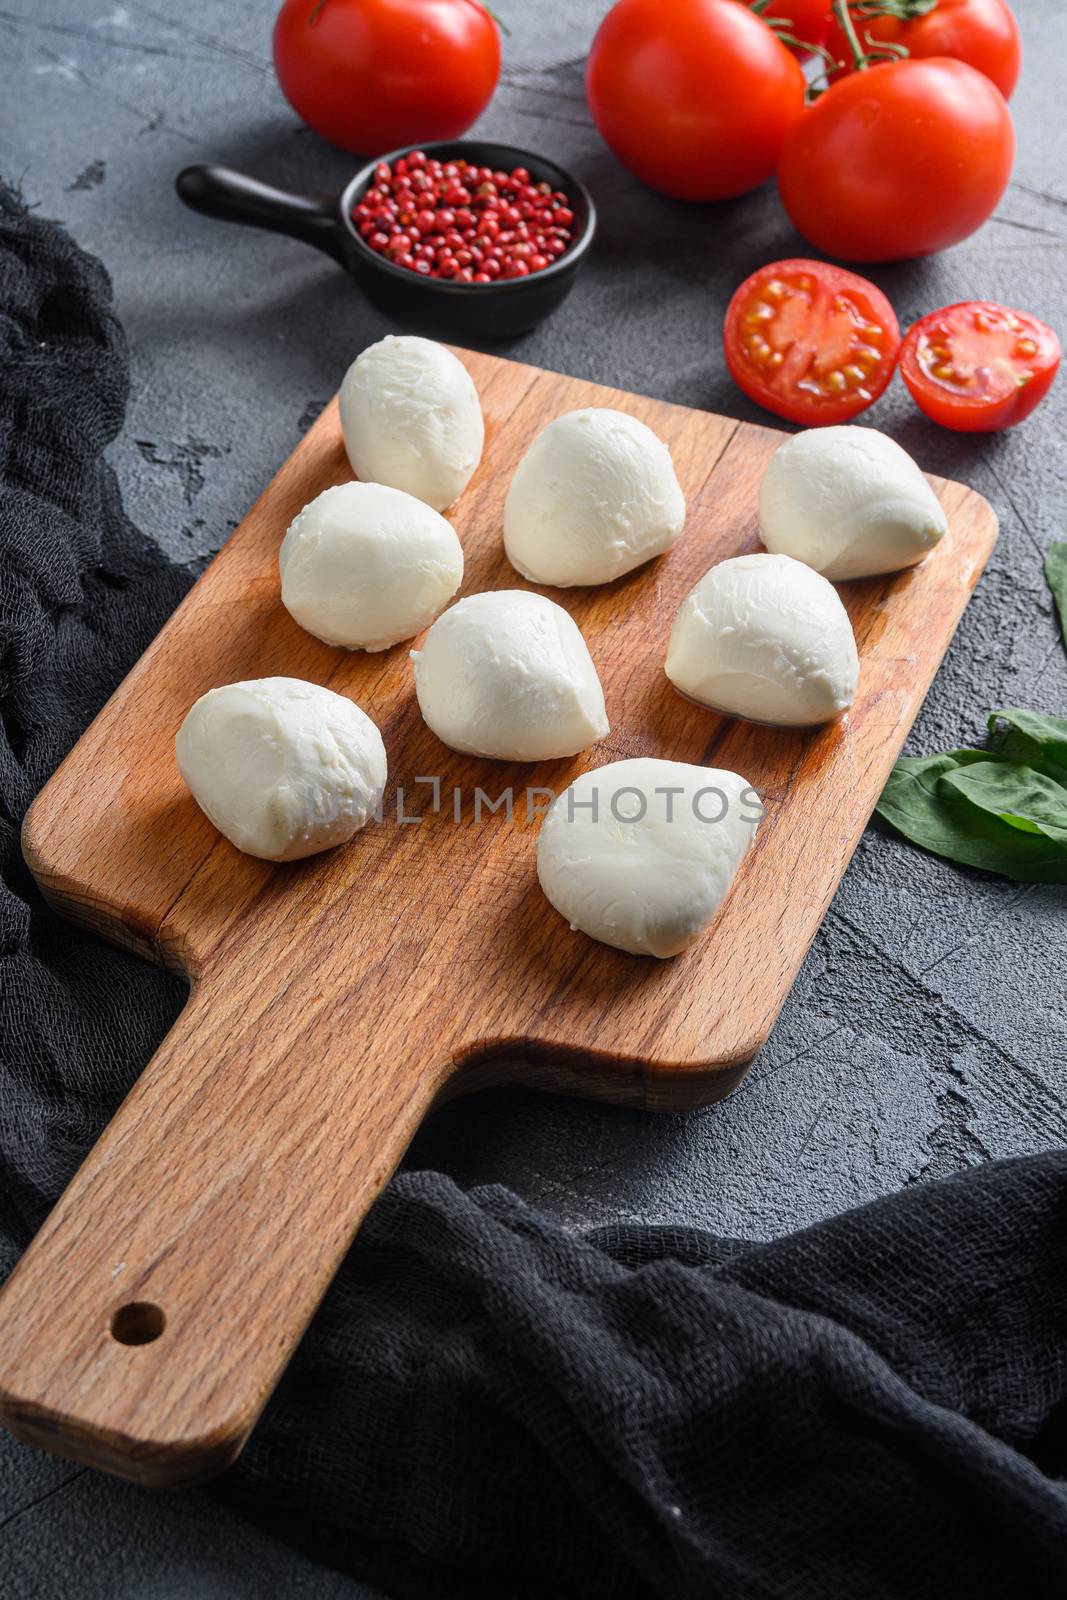 Buffalo Mozzarella cheese balls with fresh basil leaves and cherry tomatoes, the ingredients of the Italian Caprese salad, on a black cloth and grey concrete background close up vertical by Ilianesolenyi